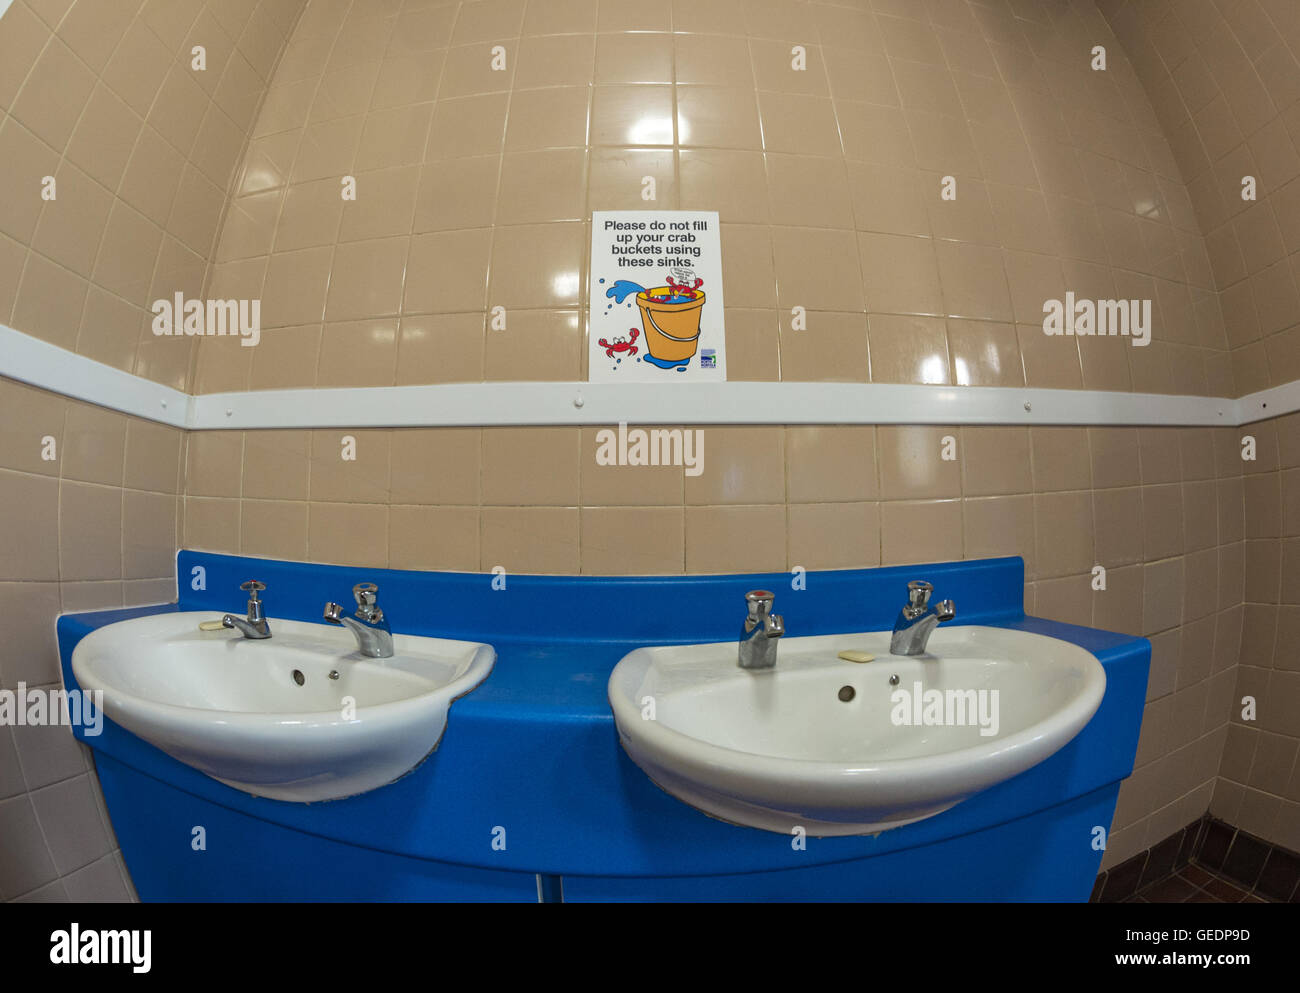 Comical sign in a male wash room not to fill your crab buckets from these sinks. Stock Photo